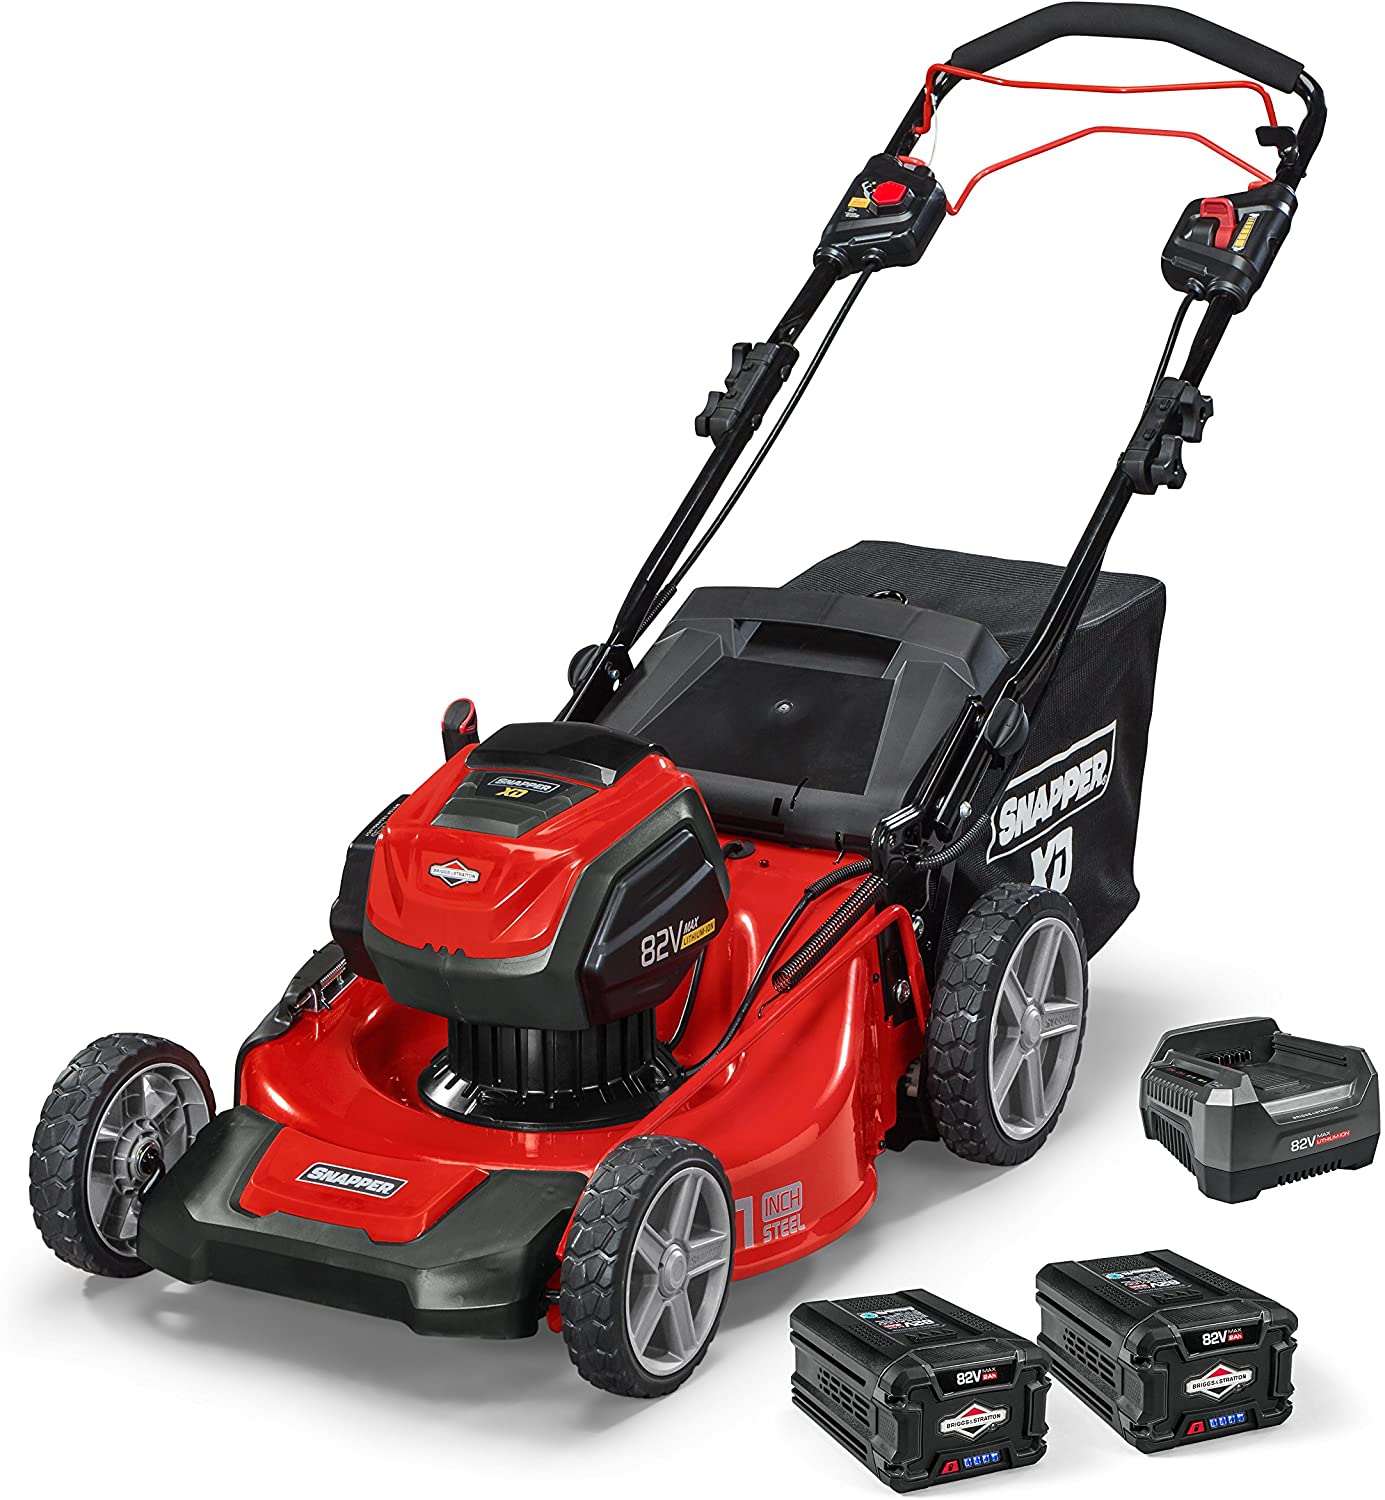 Snapper XD 82V MAX Cordless Electric Self-Propelled Lawn Mower Kit, 21-Inch